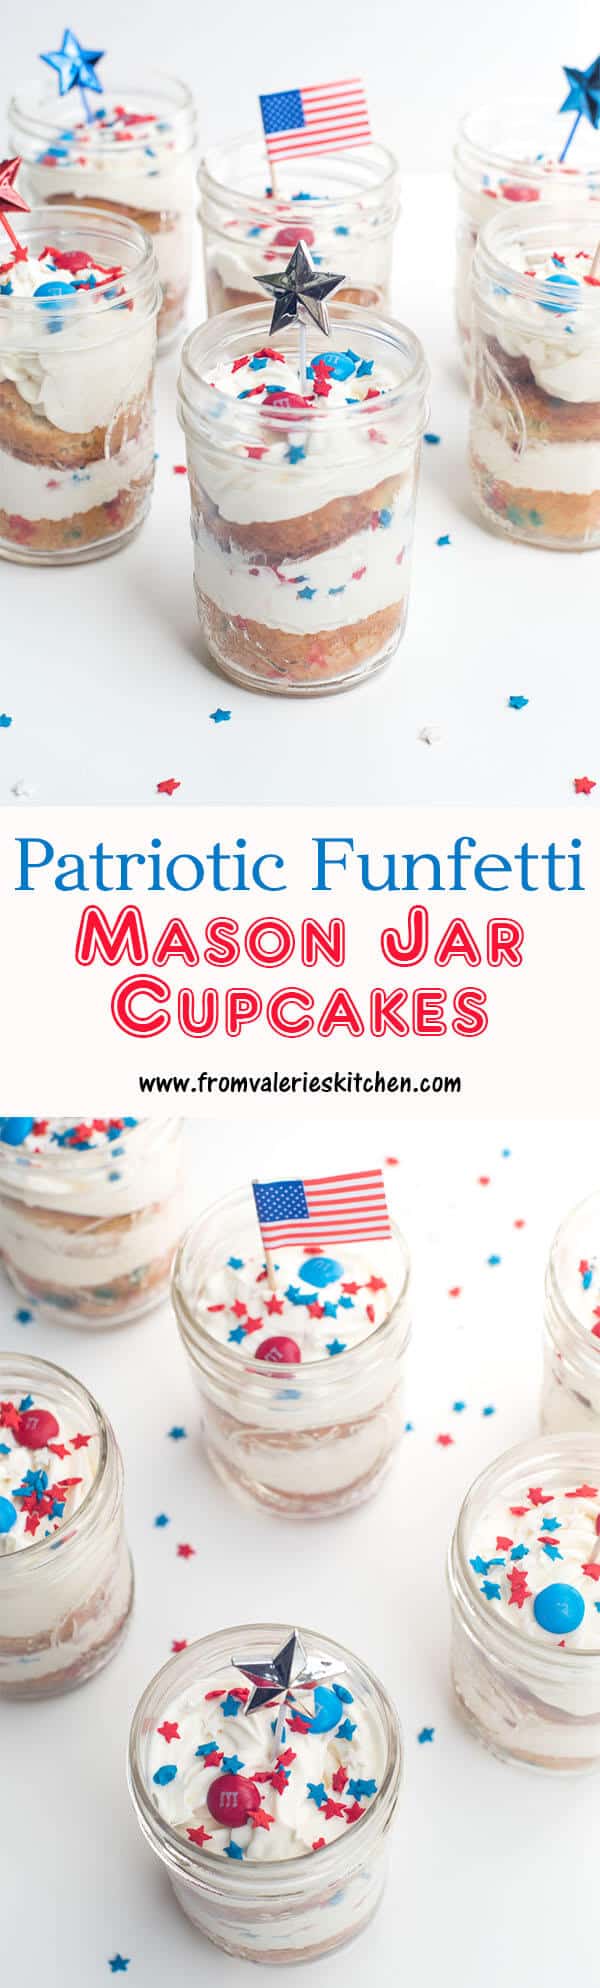 Mason jars filled with slices of cake and frosting and topped with flags and stars with text overlay.